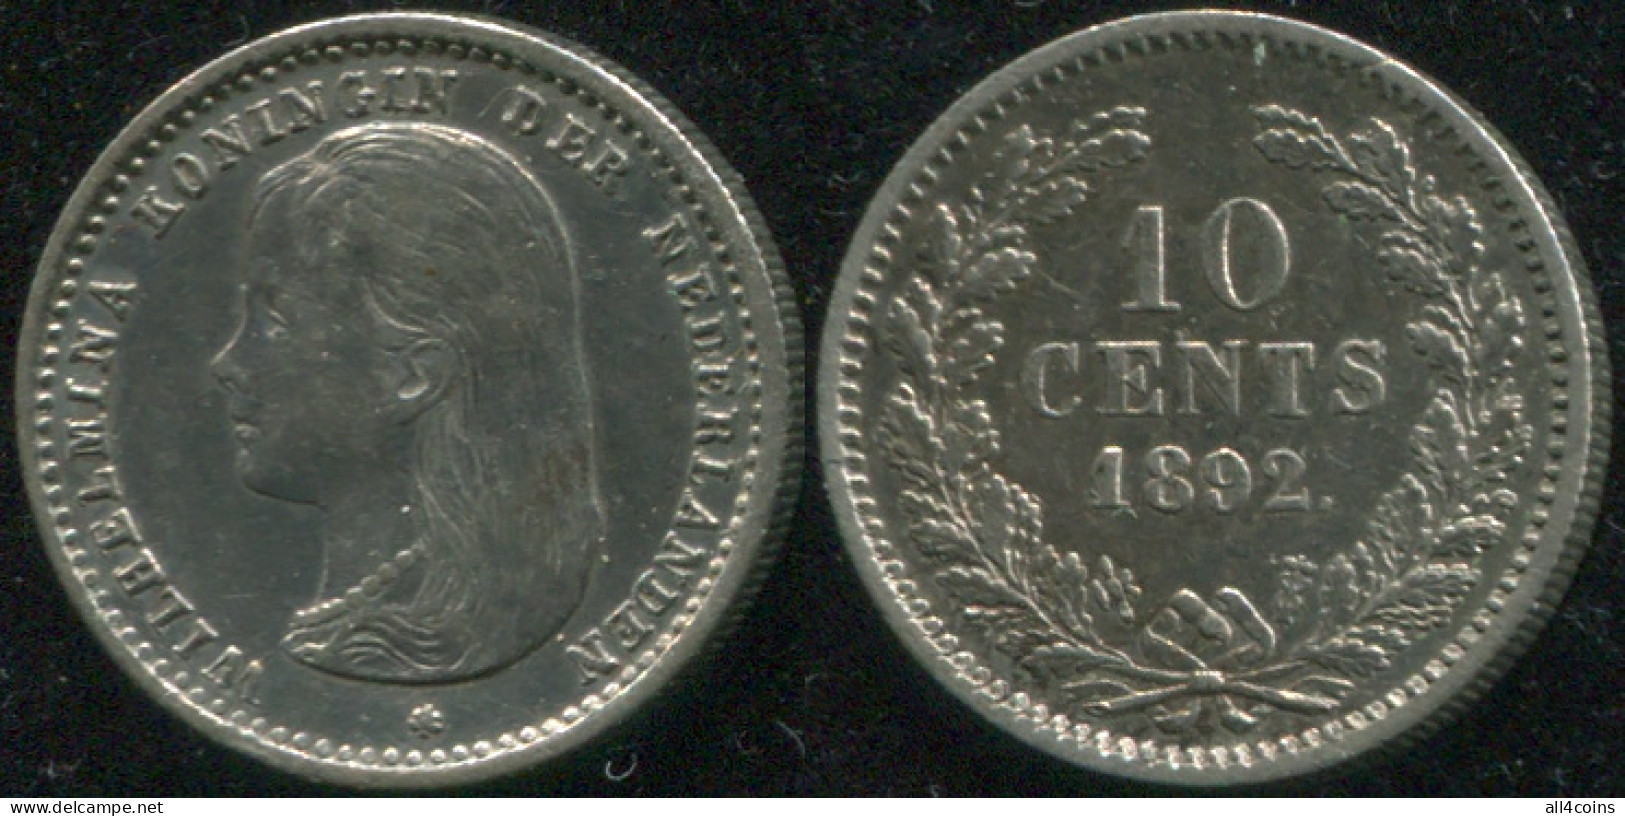 Netherlands. 10 Cents. 1892 (Silver. Coin KM#116. XF) - 10 Cent